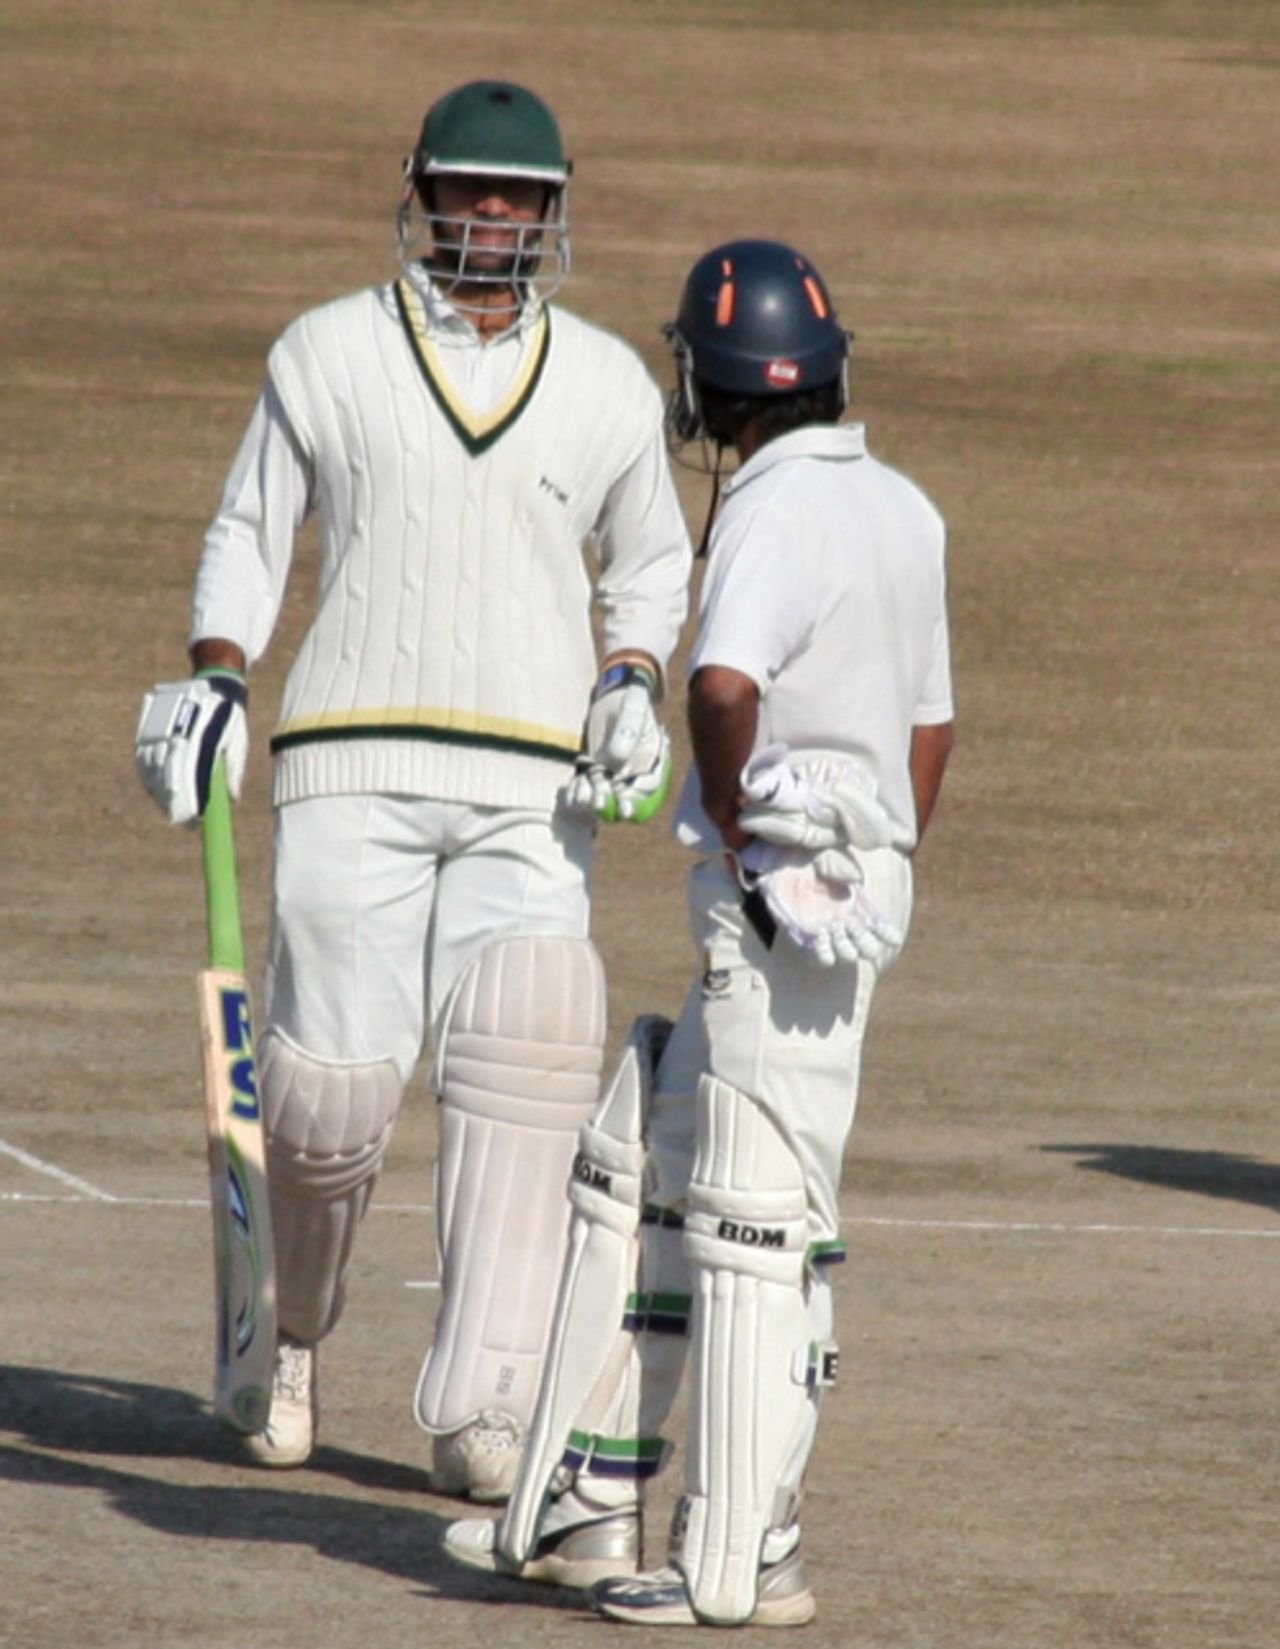 Mukesh Sharma talks to his team-mate after completing his century, Himachal Pradesh v Rajashtan, Ranji Tropy Super League, Group A, 7th round, 1st day, Dharamsala, December 25, 2007 